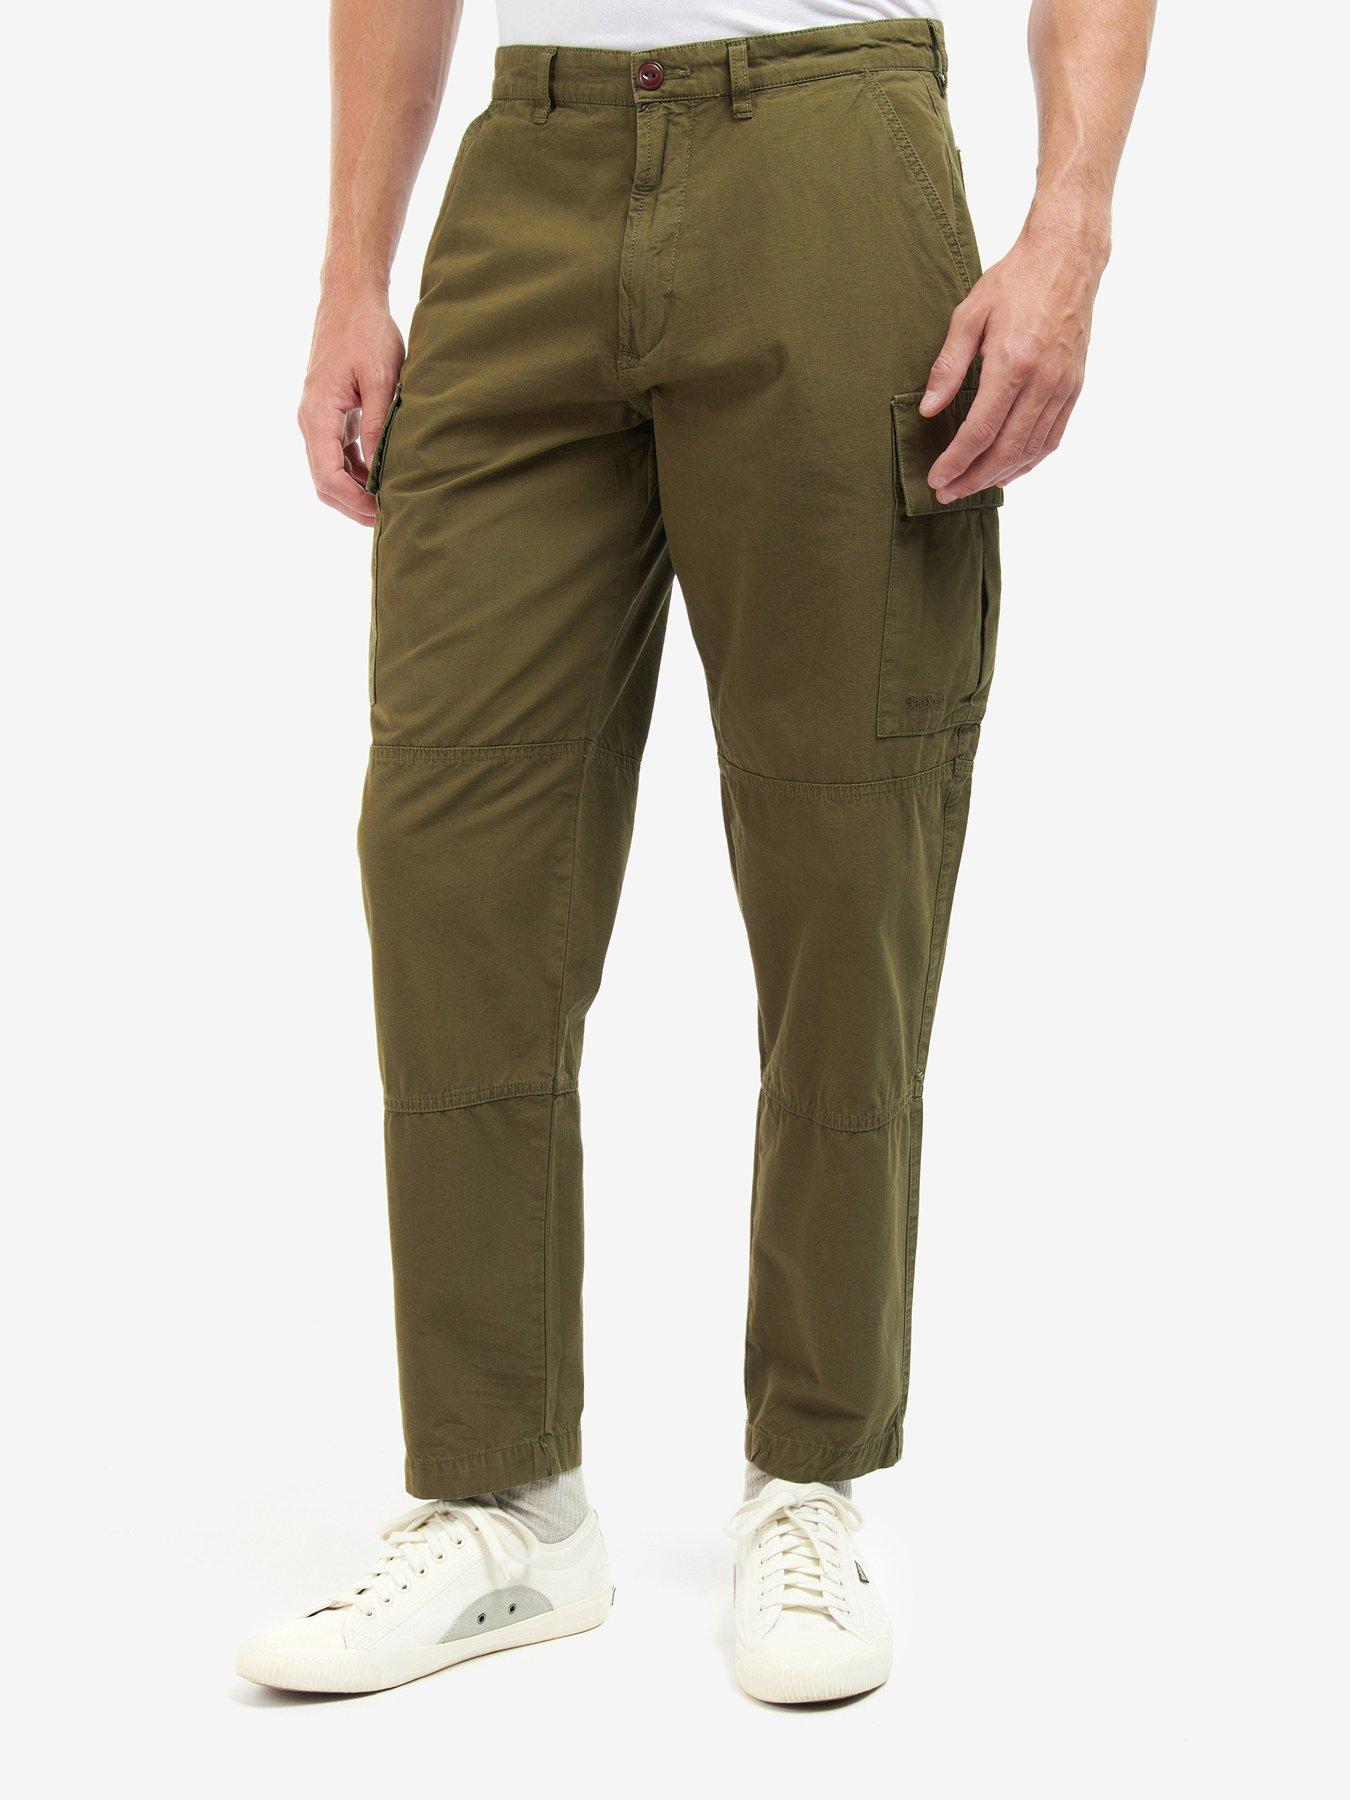 Superdry Superdry Loose Fit Cargo Trousers - Light Khaki